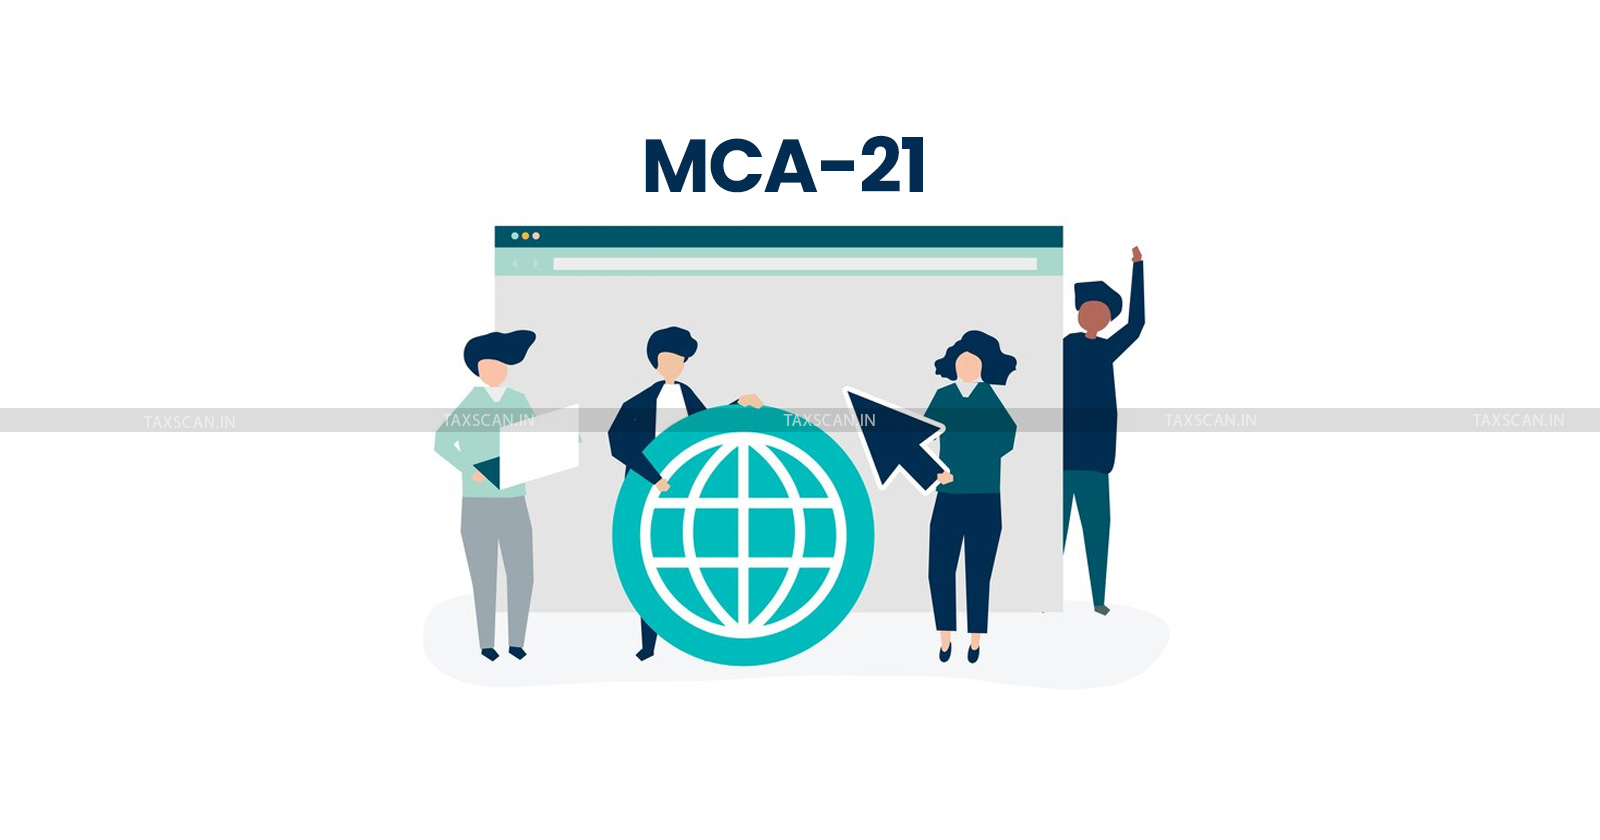 MCA - Ministry of Corporate Affairs - MCA 21 Portal - Change Request Form - Stakeholder - taxscan